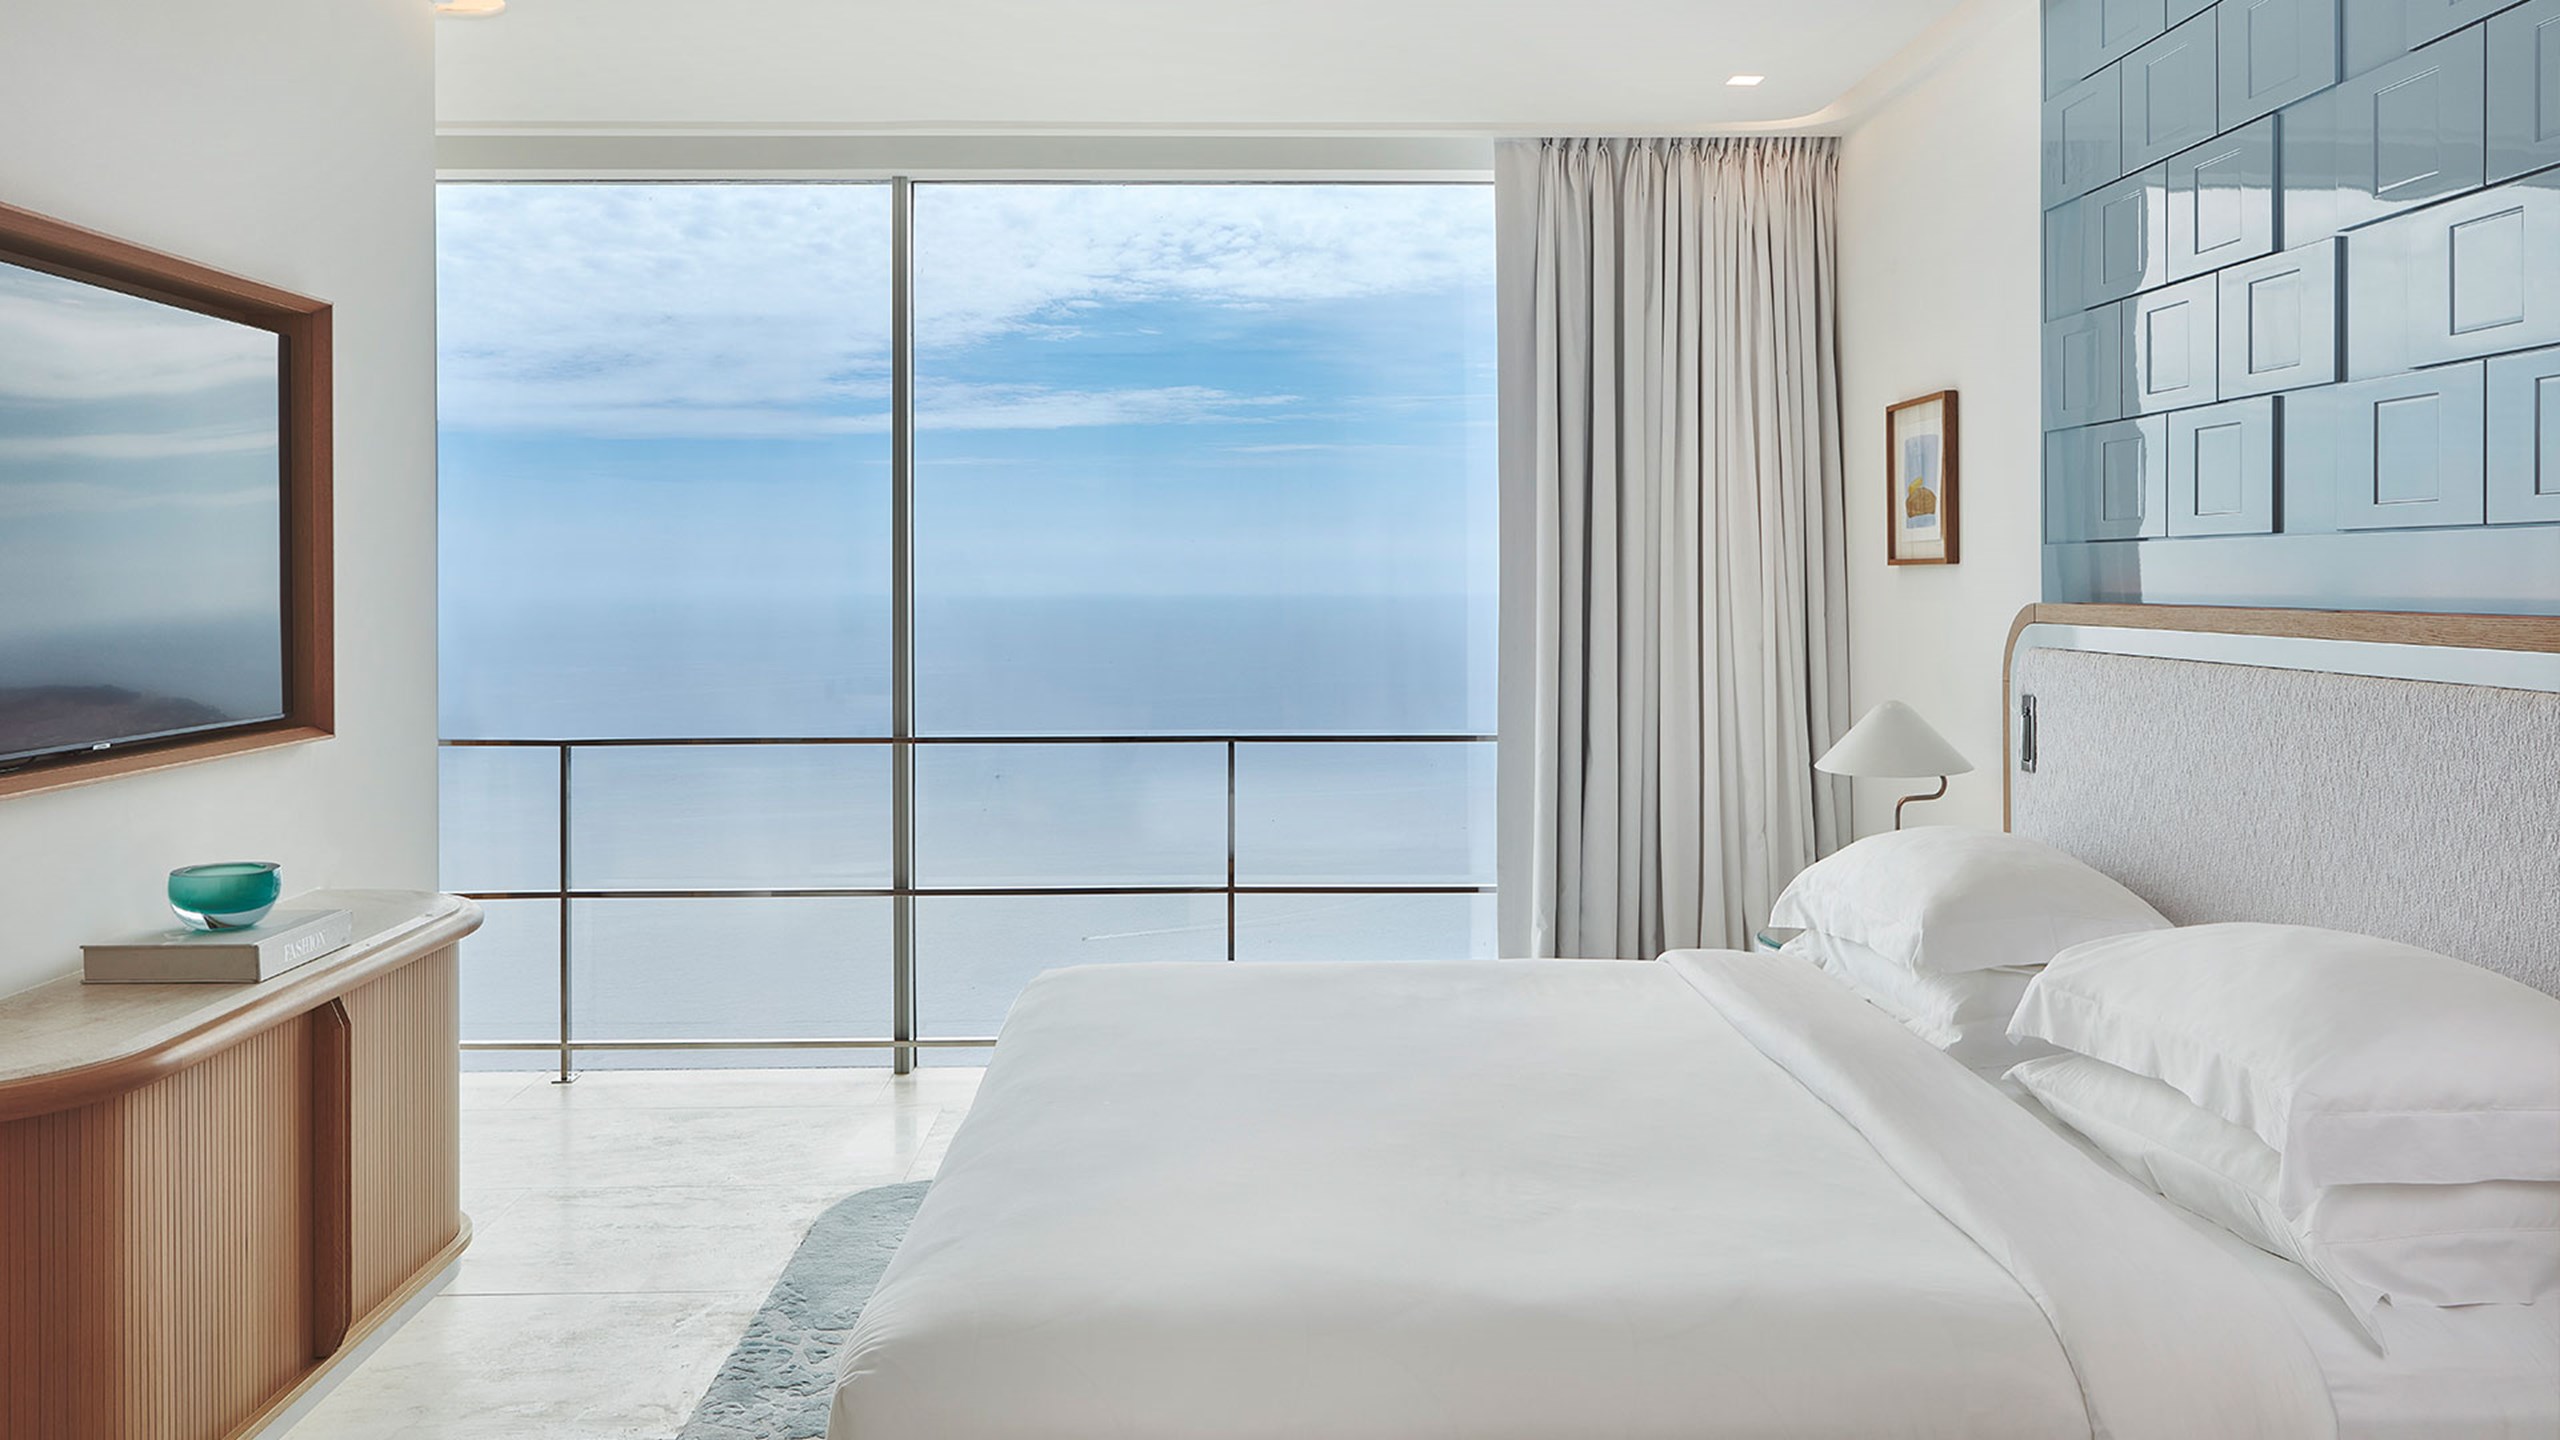 King size bed with white bedding set against a blue tiled wall with patio doors open looking out to sweeping sea view